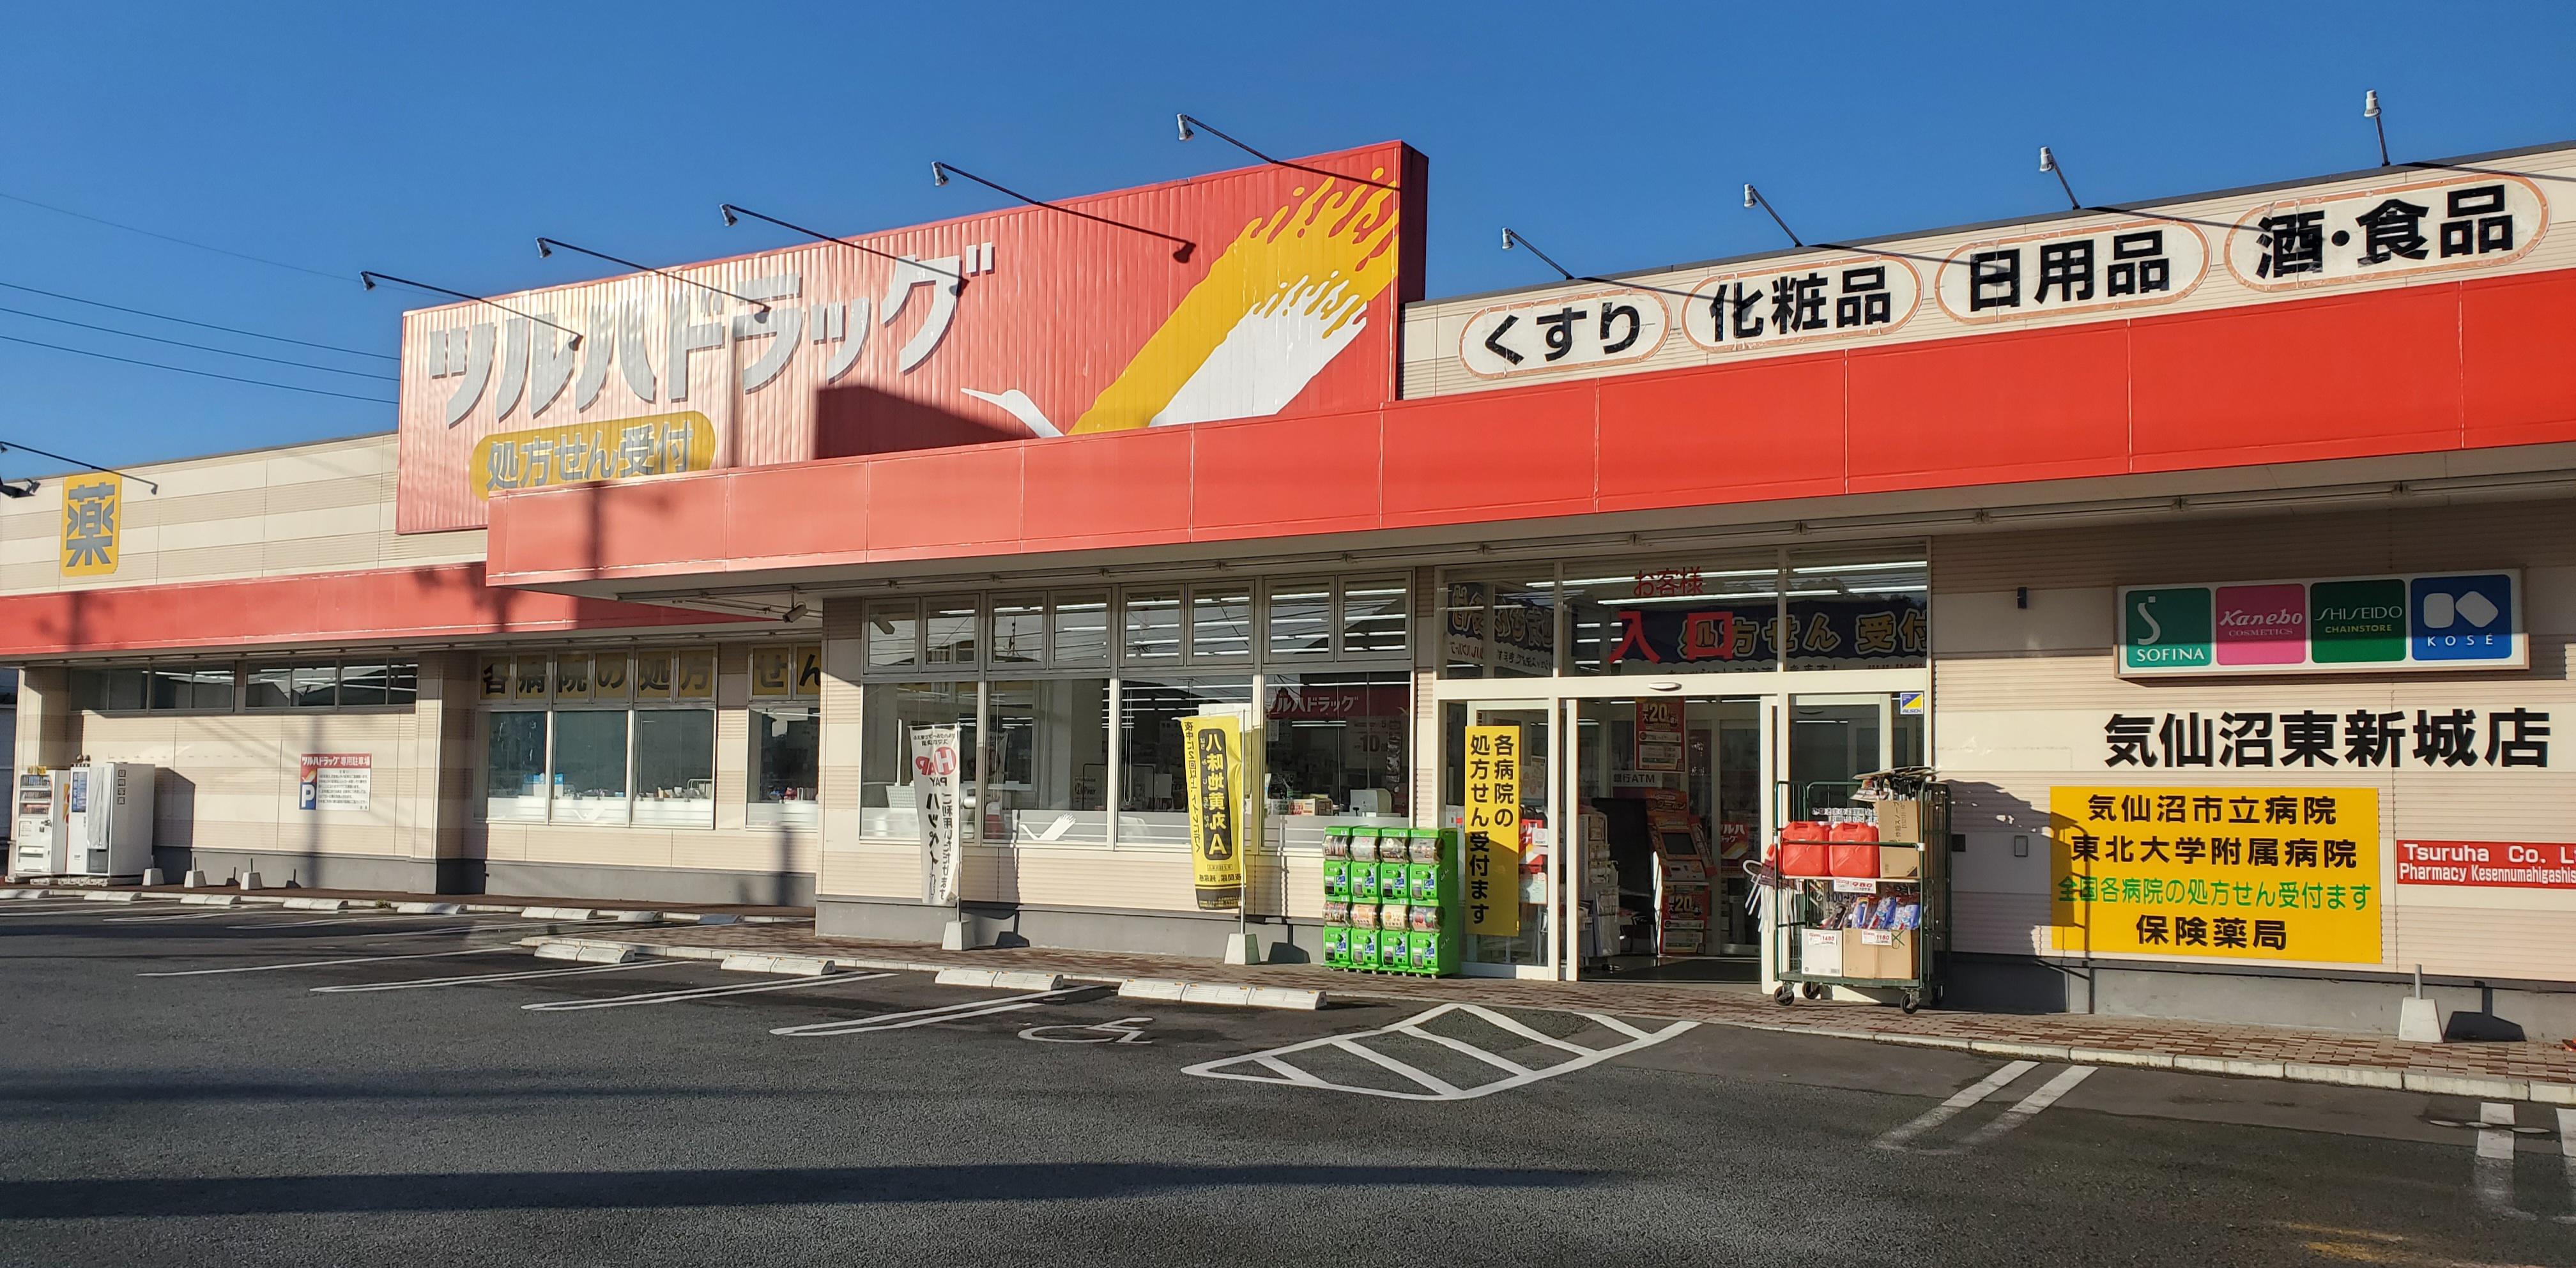 Images ツルハドラッグ 気仙沼東新城店